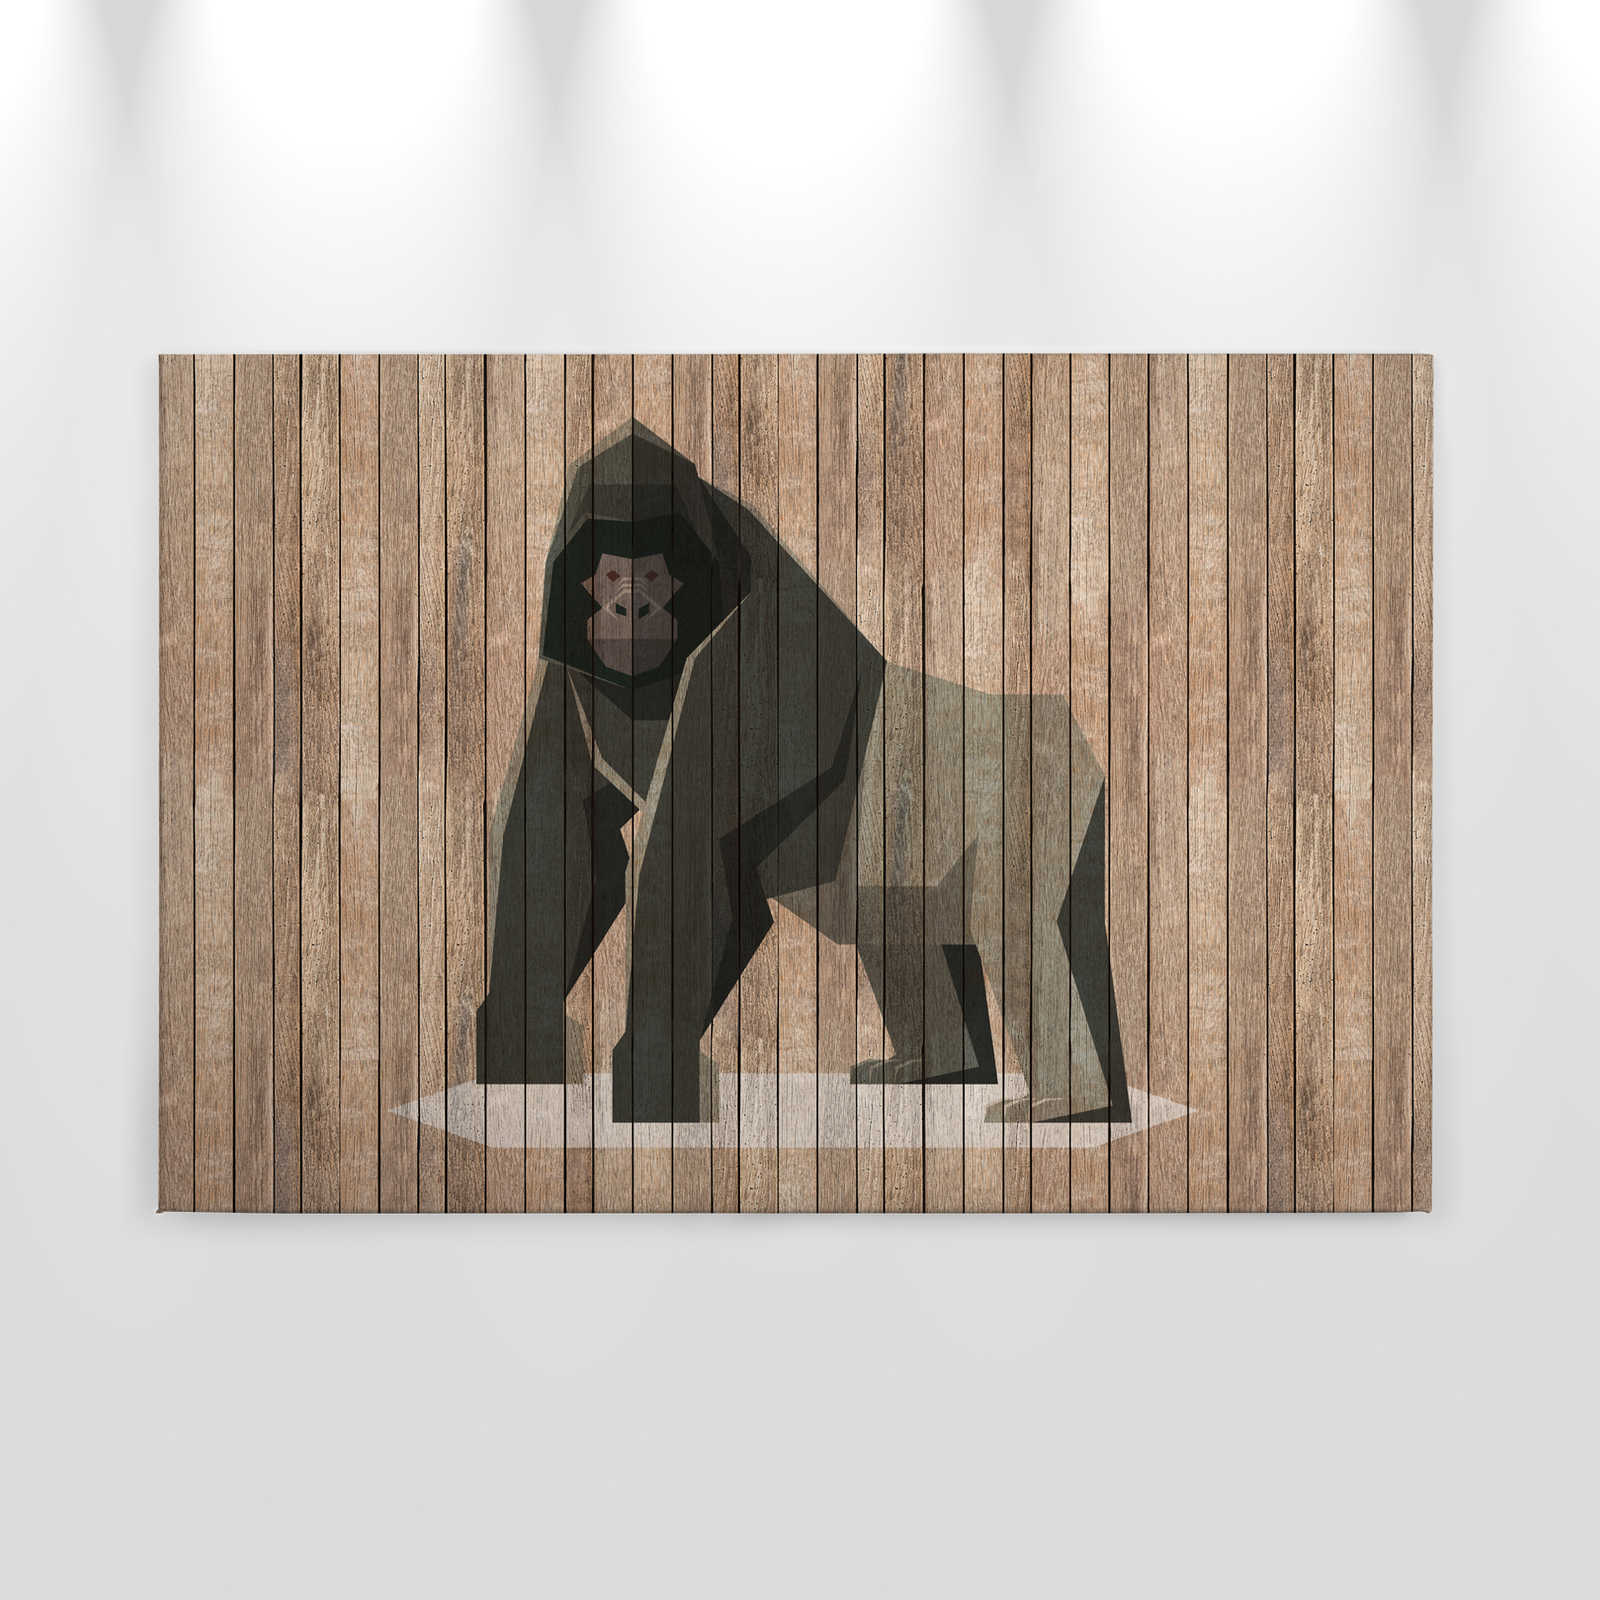             Born to Be Wild 3 - Canvas painting Gorilla on board wall - Wooden panels Wide - 0.90 m x 0.60 m
        